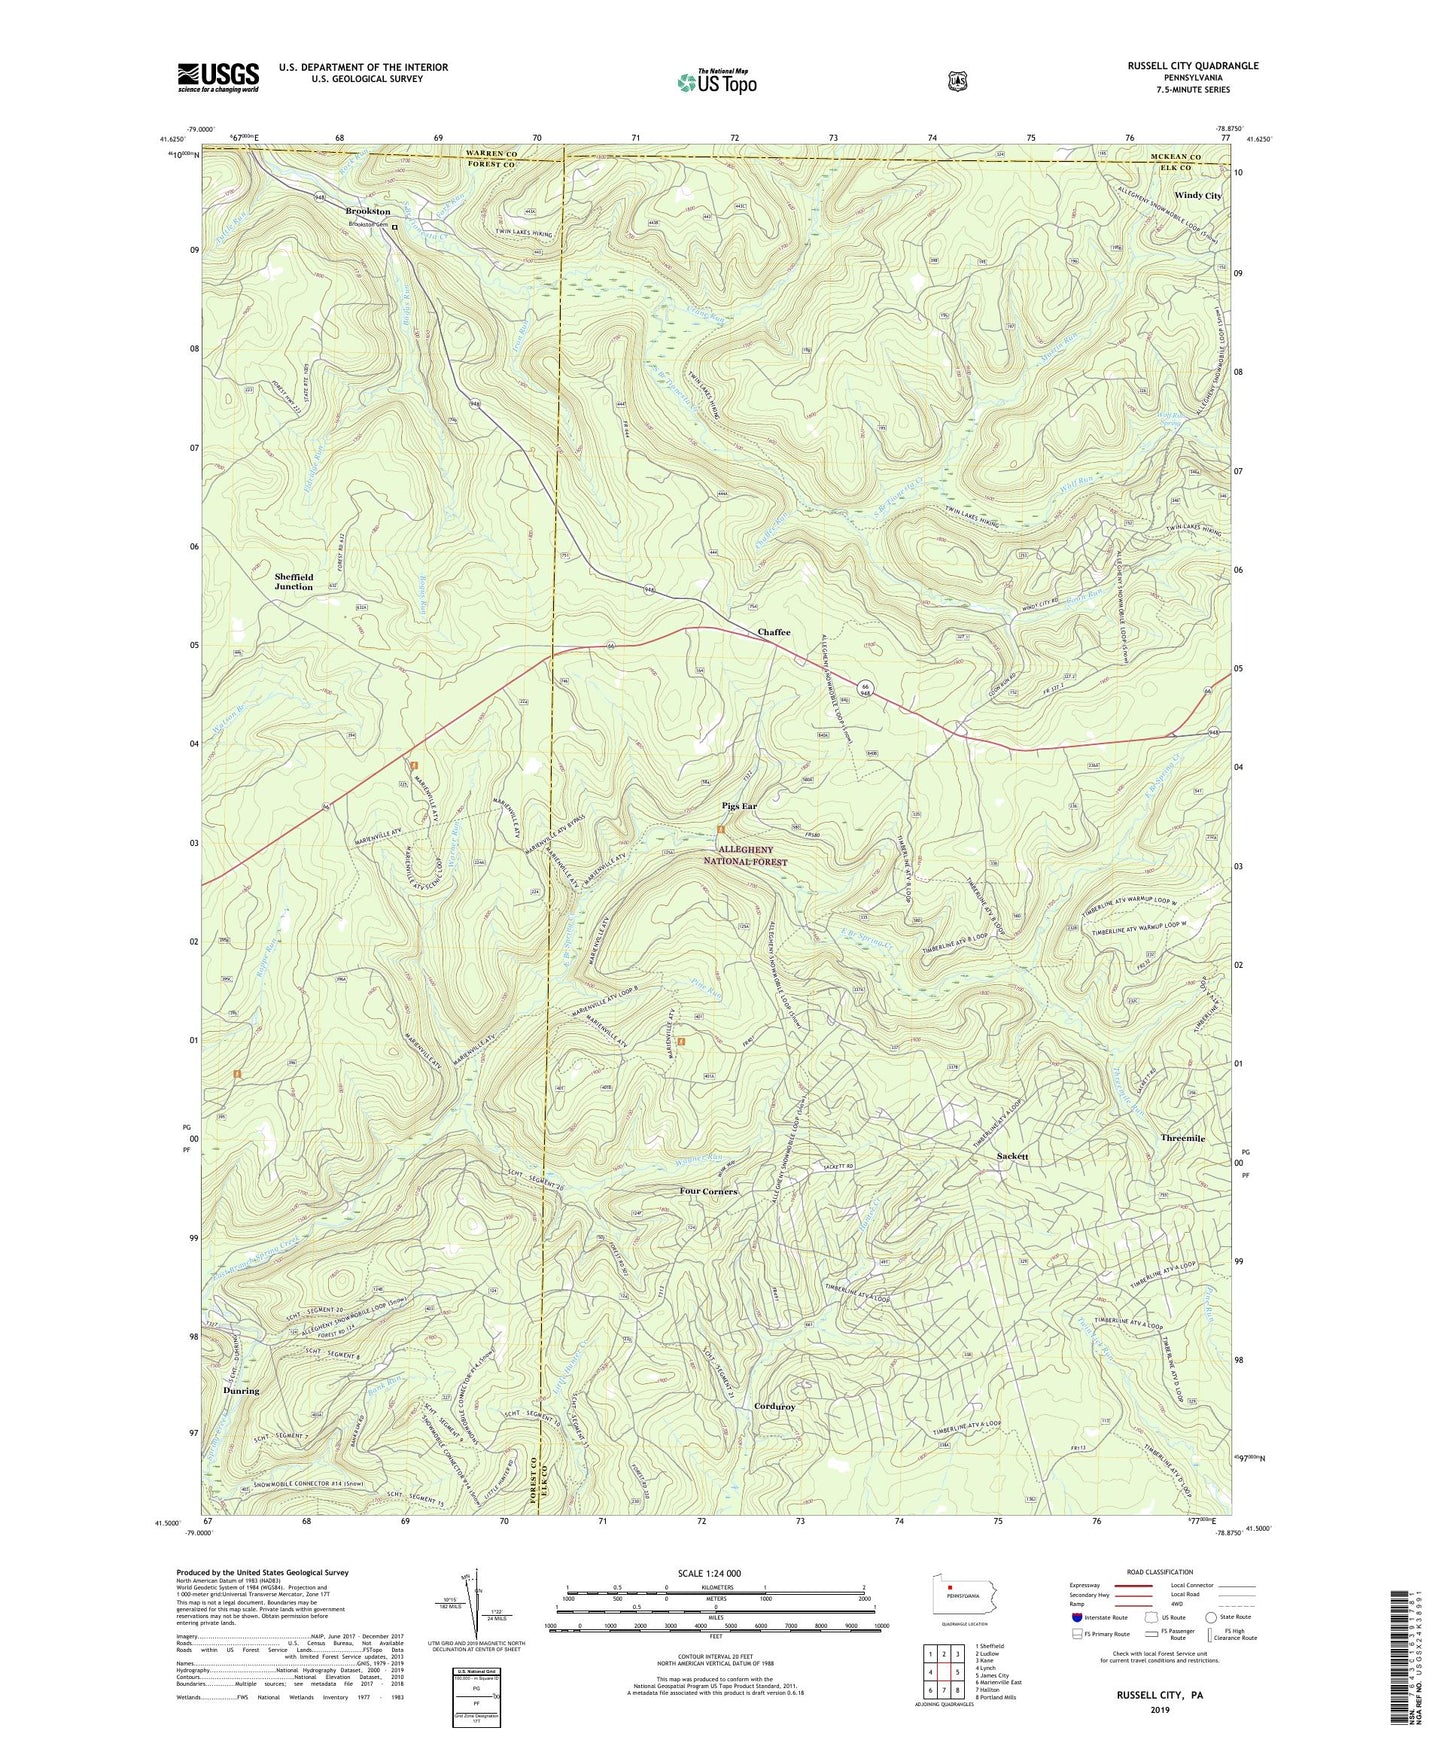 Russell City Pennsylvania US Topo Map Image